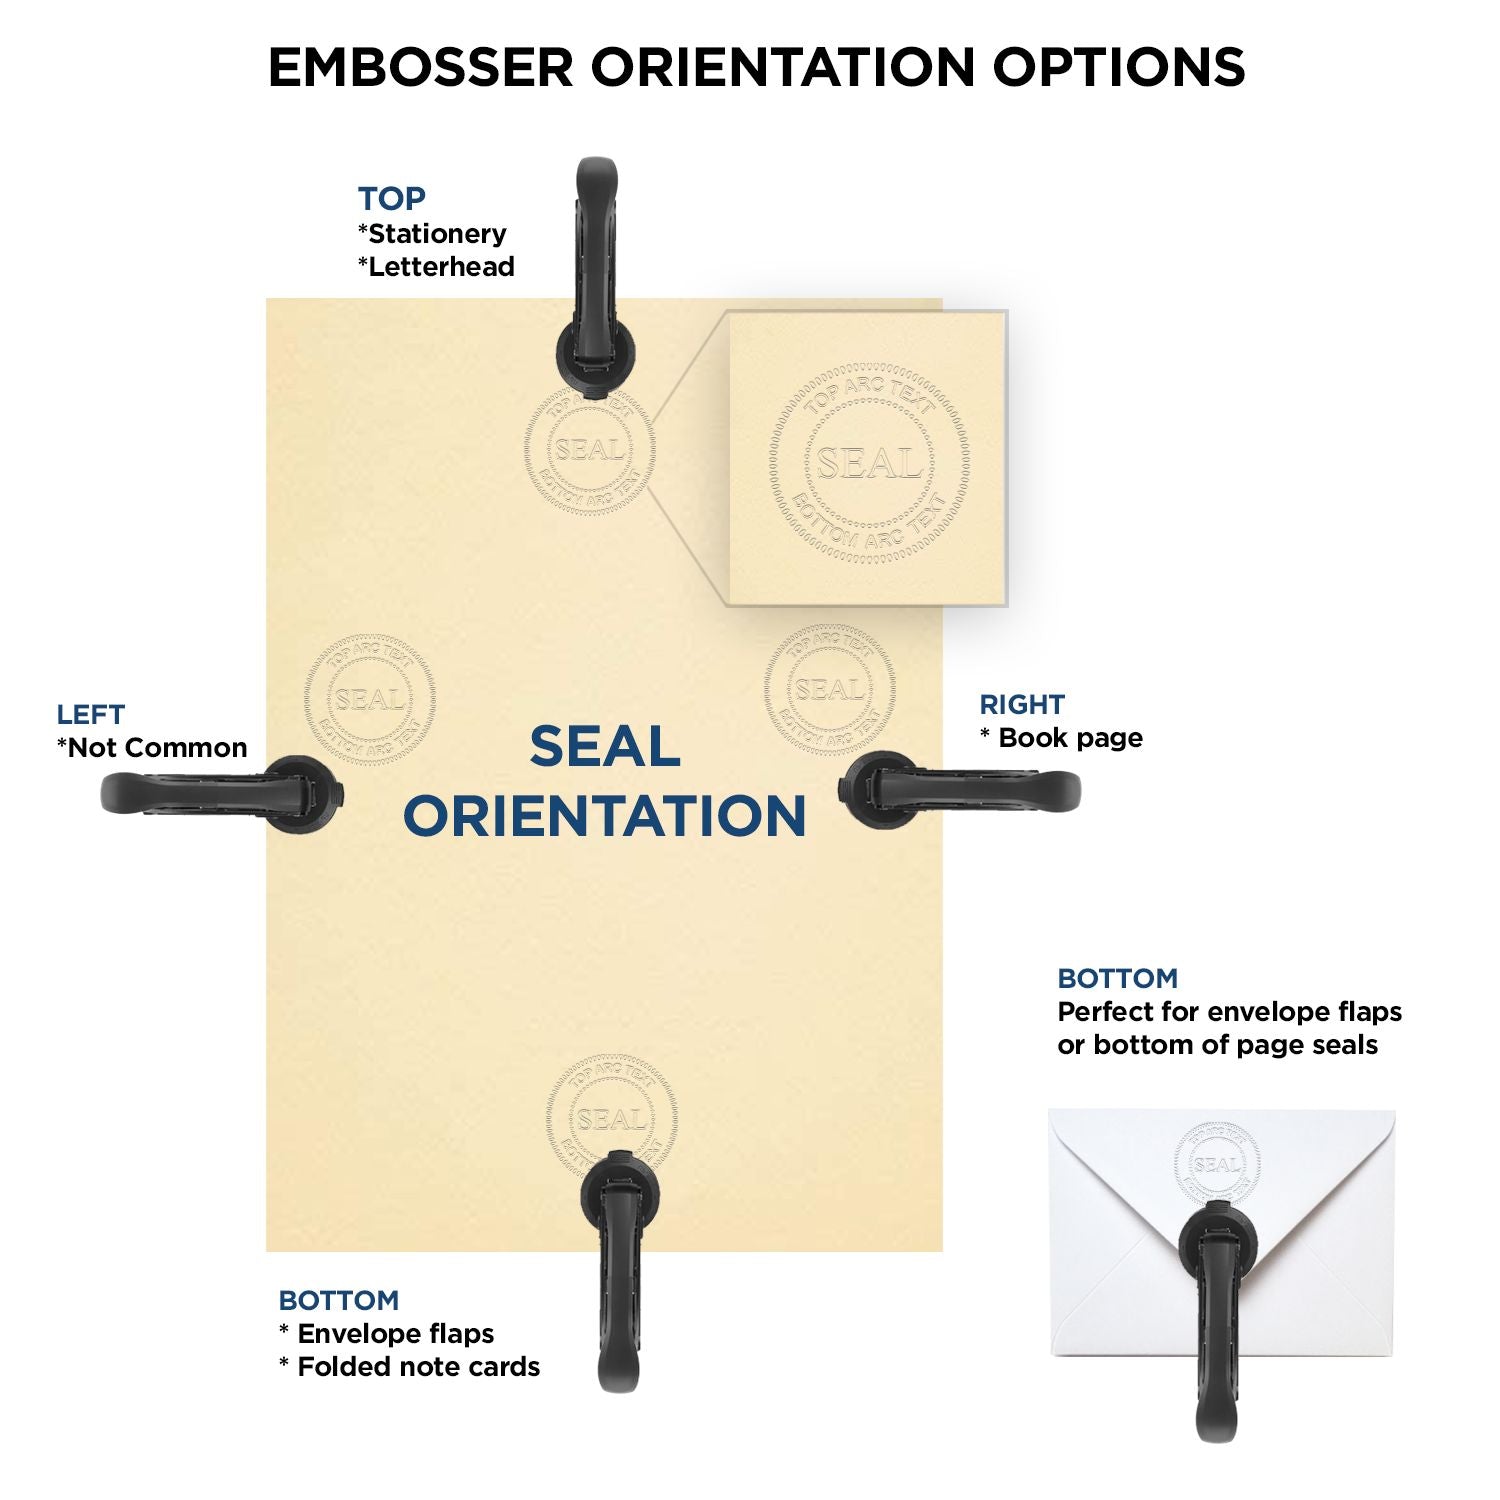 An infographic for the Heavy Duty Cast Iron North Dakota Land Surveyor Seal Embosser showing embosser orientation, this is showing examples of a top, bottom, right and left insert.